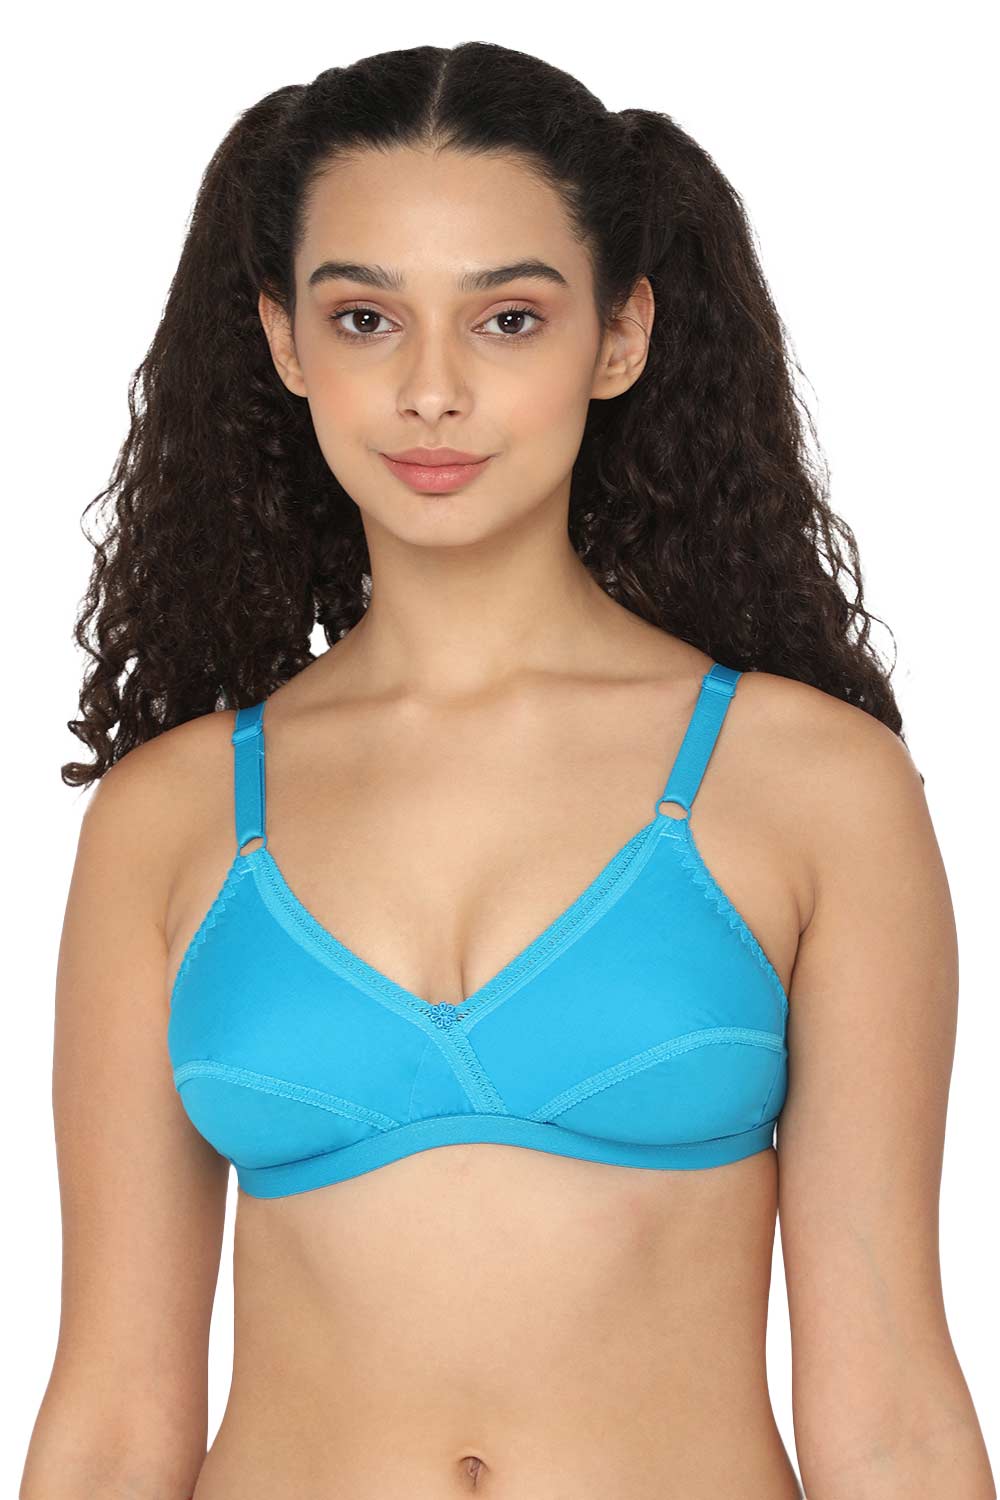 Naidu Hall Heritage-Bra Special Combo Pack - Lovable - C33